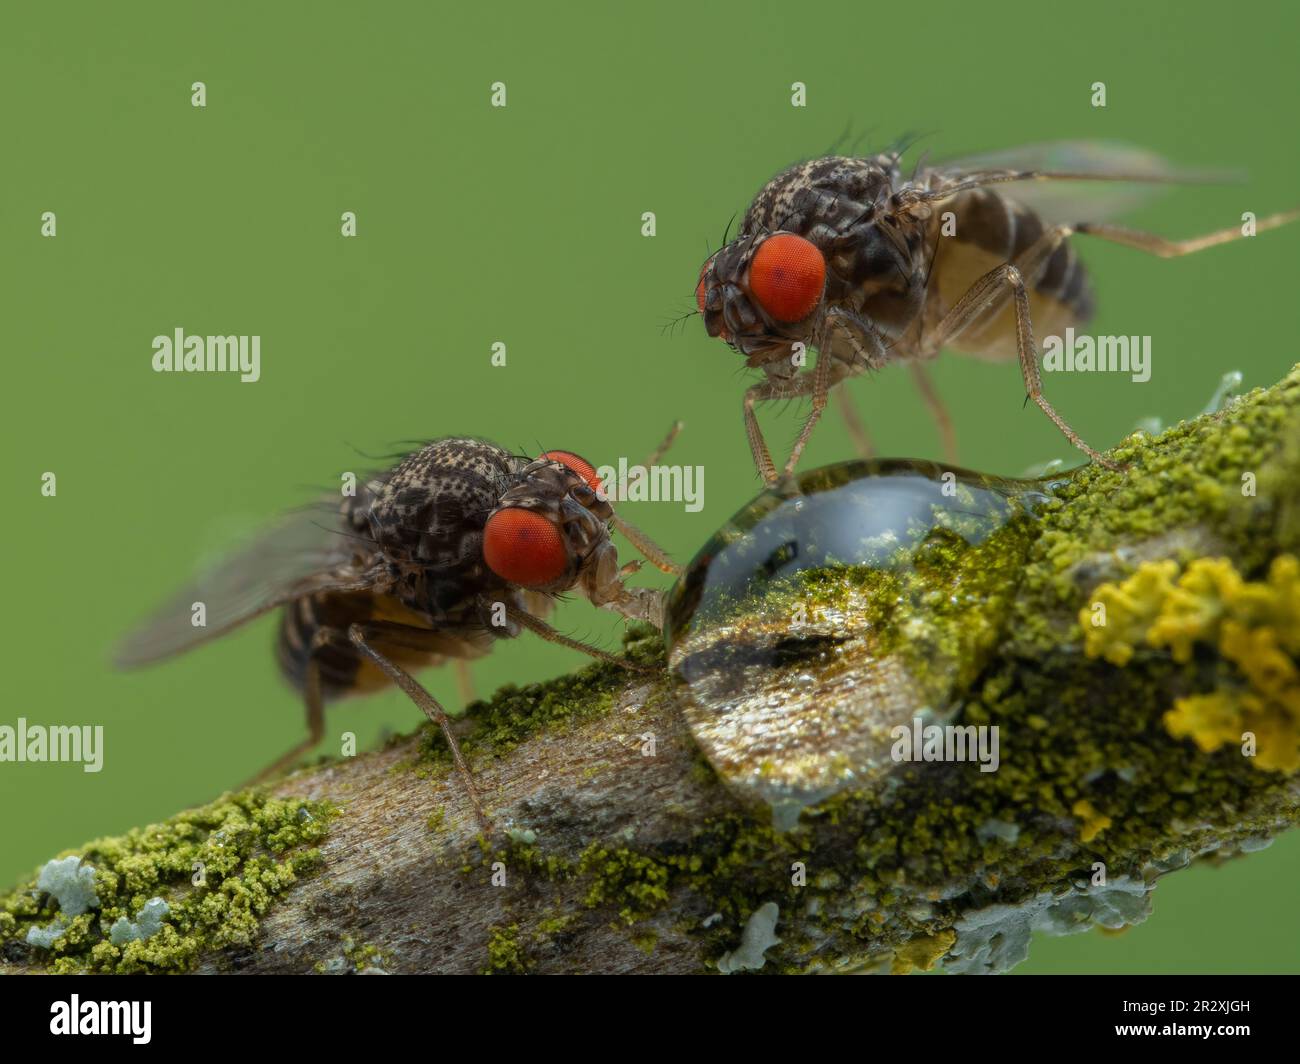 close-up of two large fruit flies (Drosophila hydei) with bright red eyes, drinking from a drop of honey on a lichen-covered twig Stock Photo